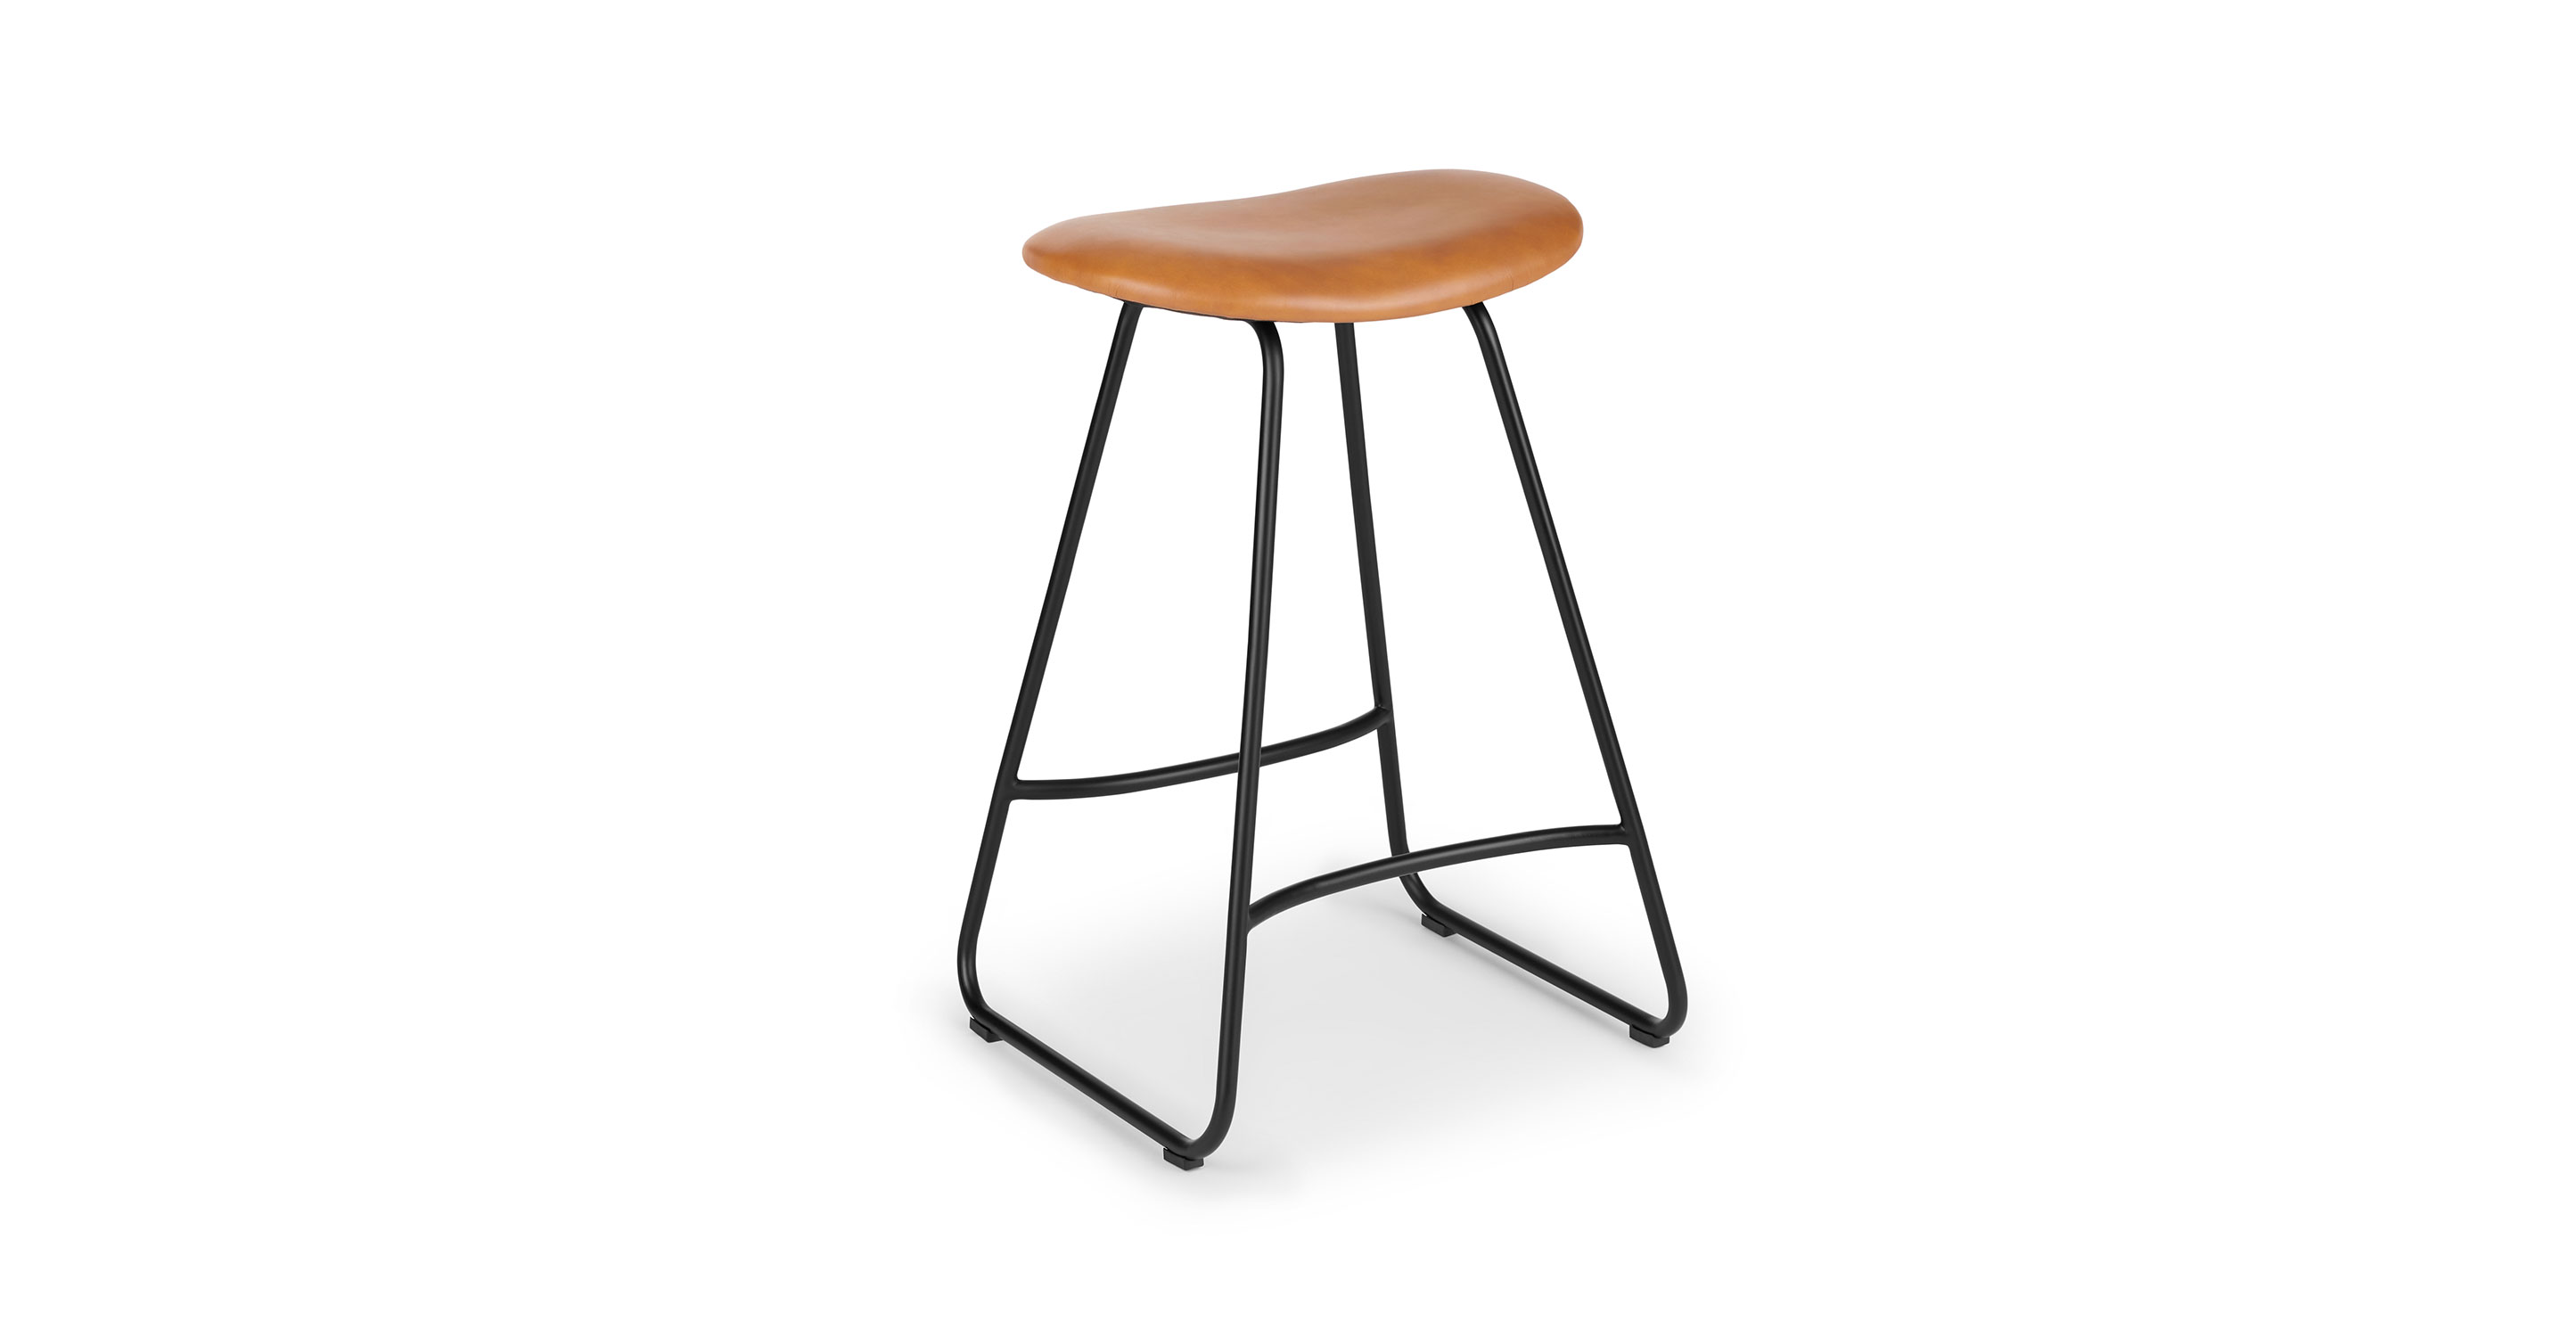 Toscana Tan Leather Counter Stool, Leather Seat Bar Stools